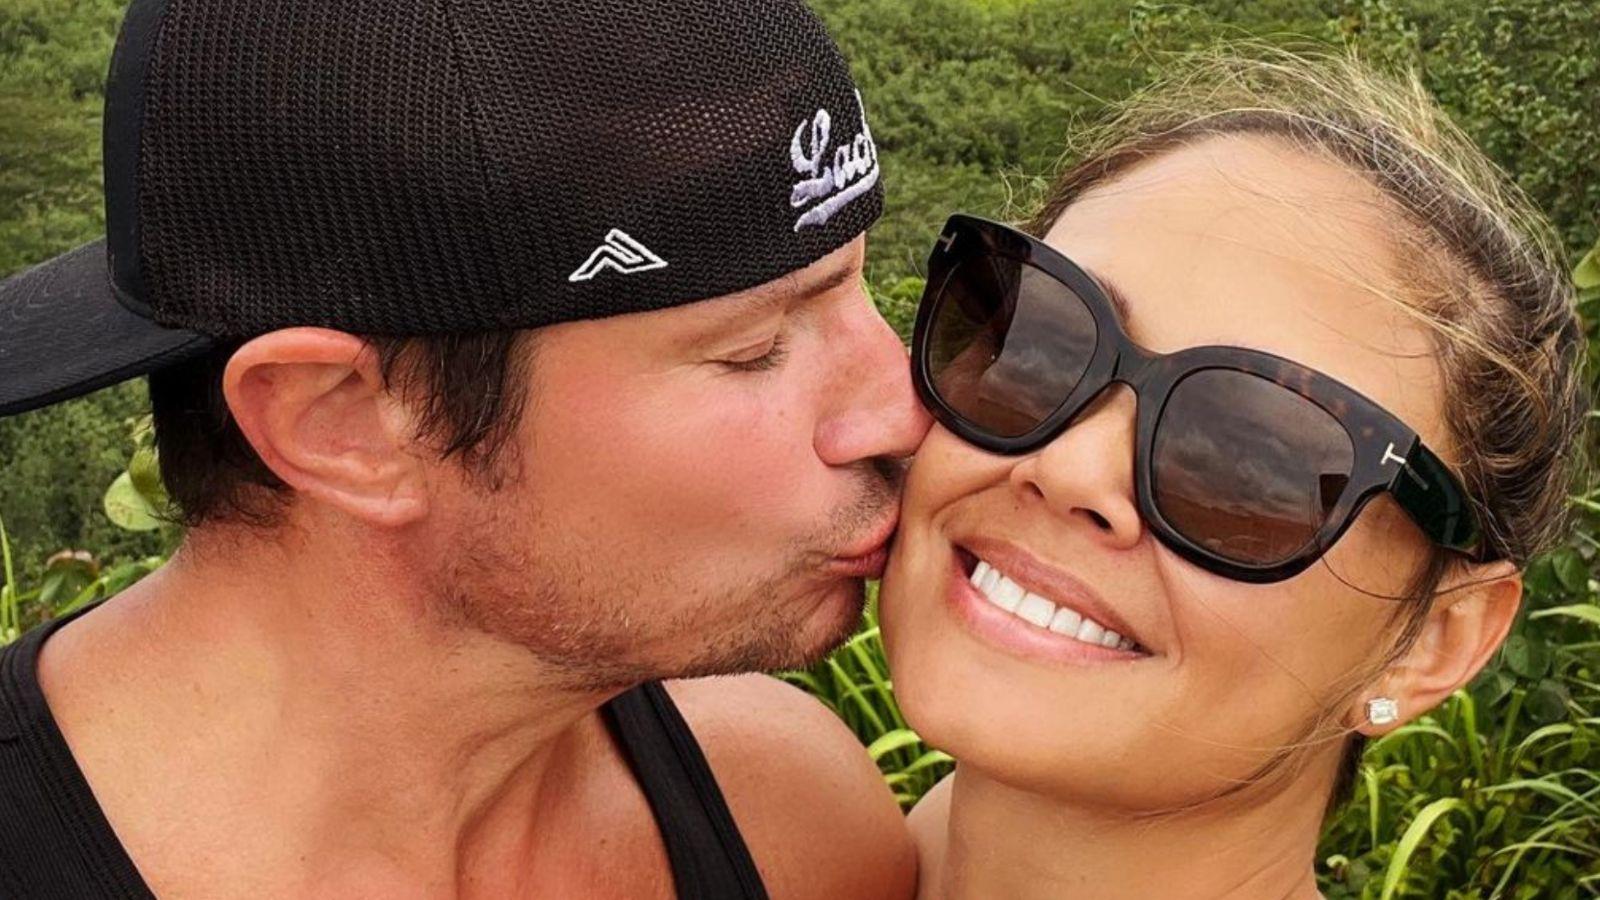 Love is Blind hosts Nick and Vanessa Lachey